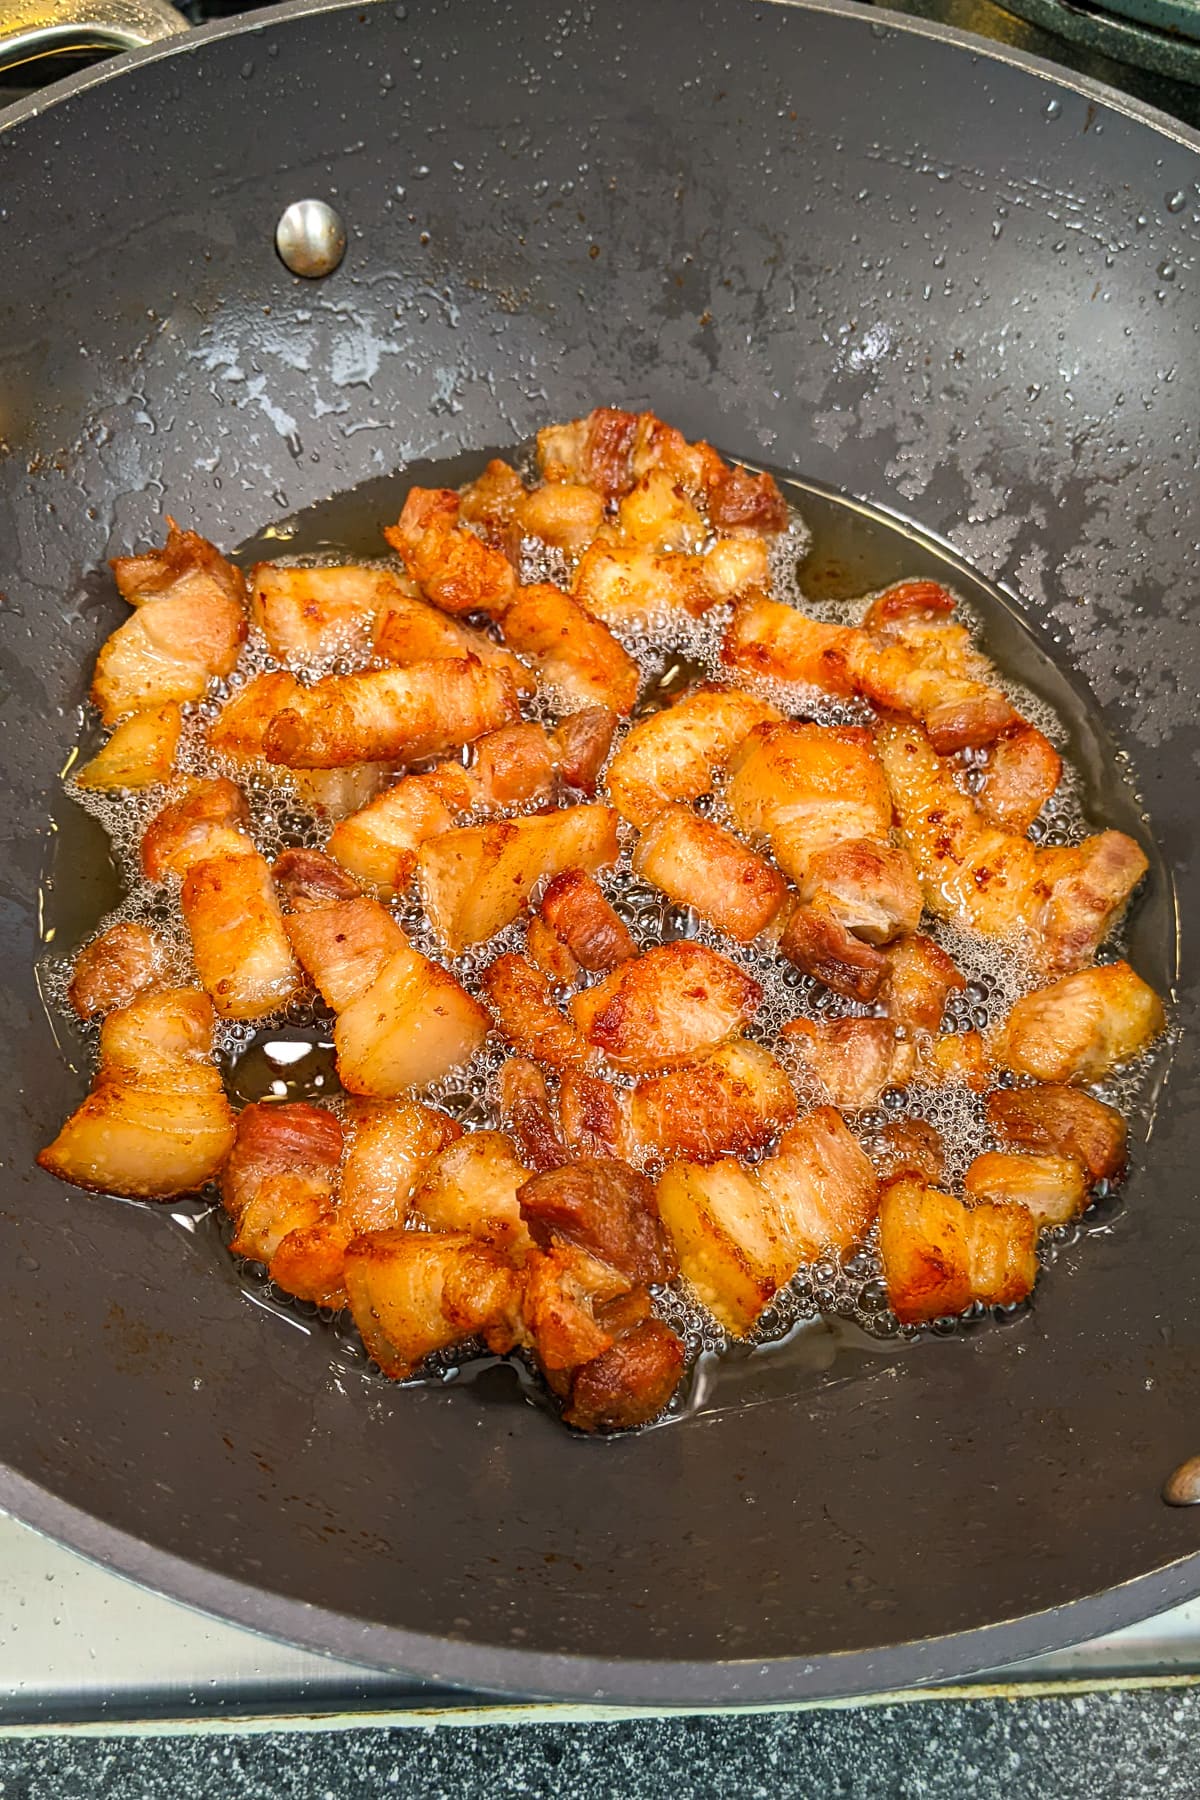 Frying pork belly in a deep wok on the stove.